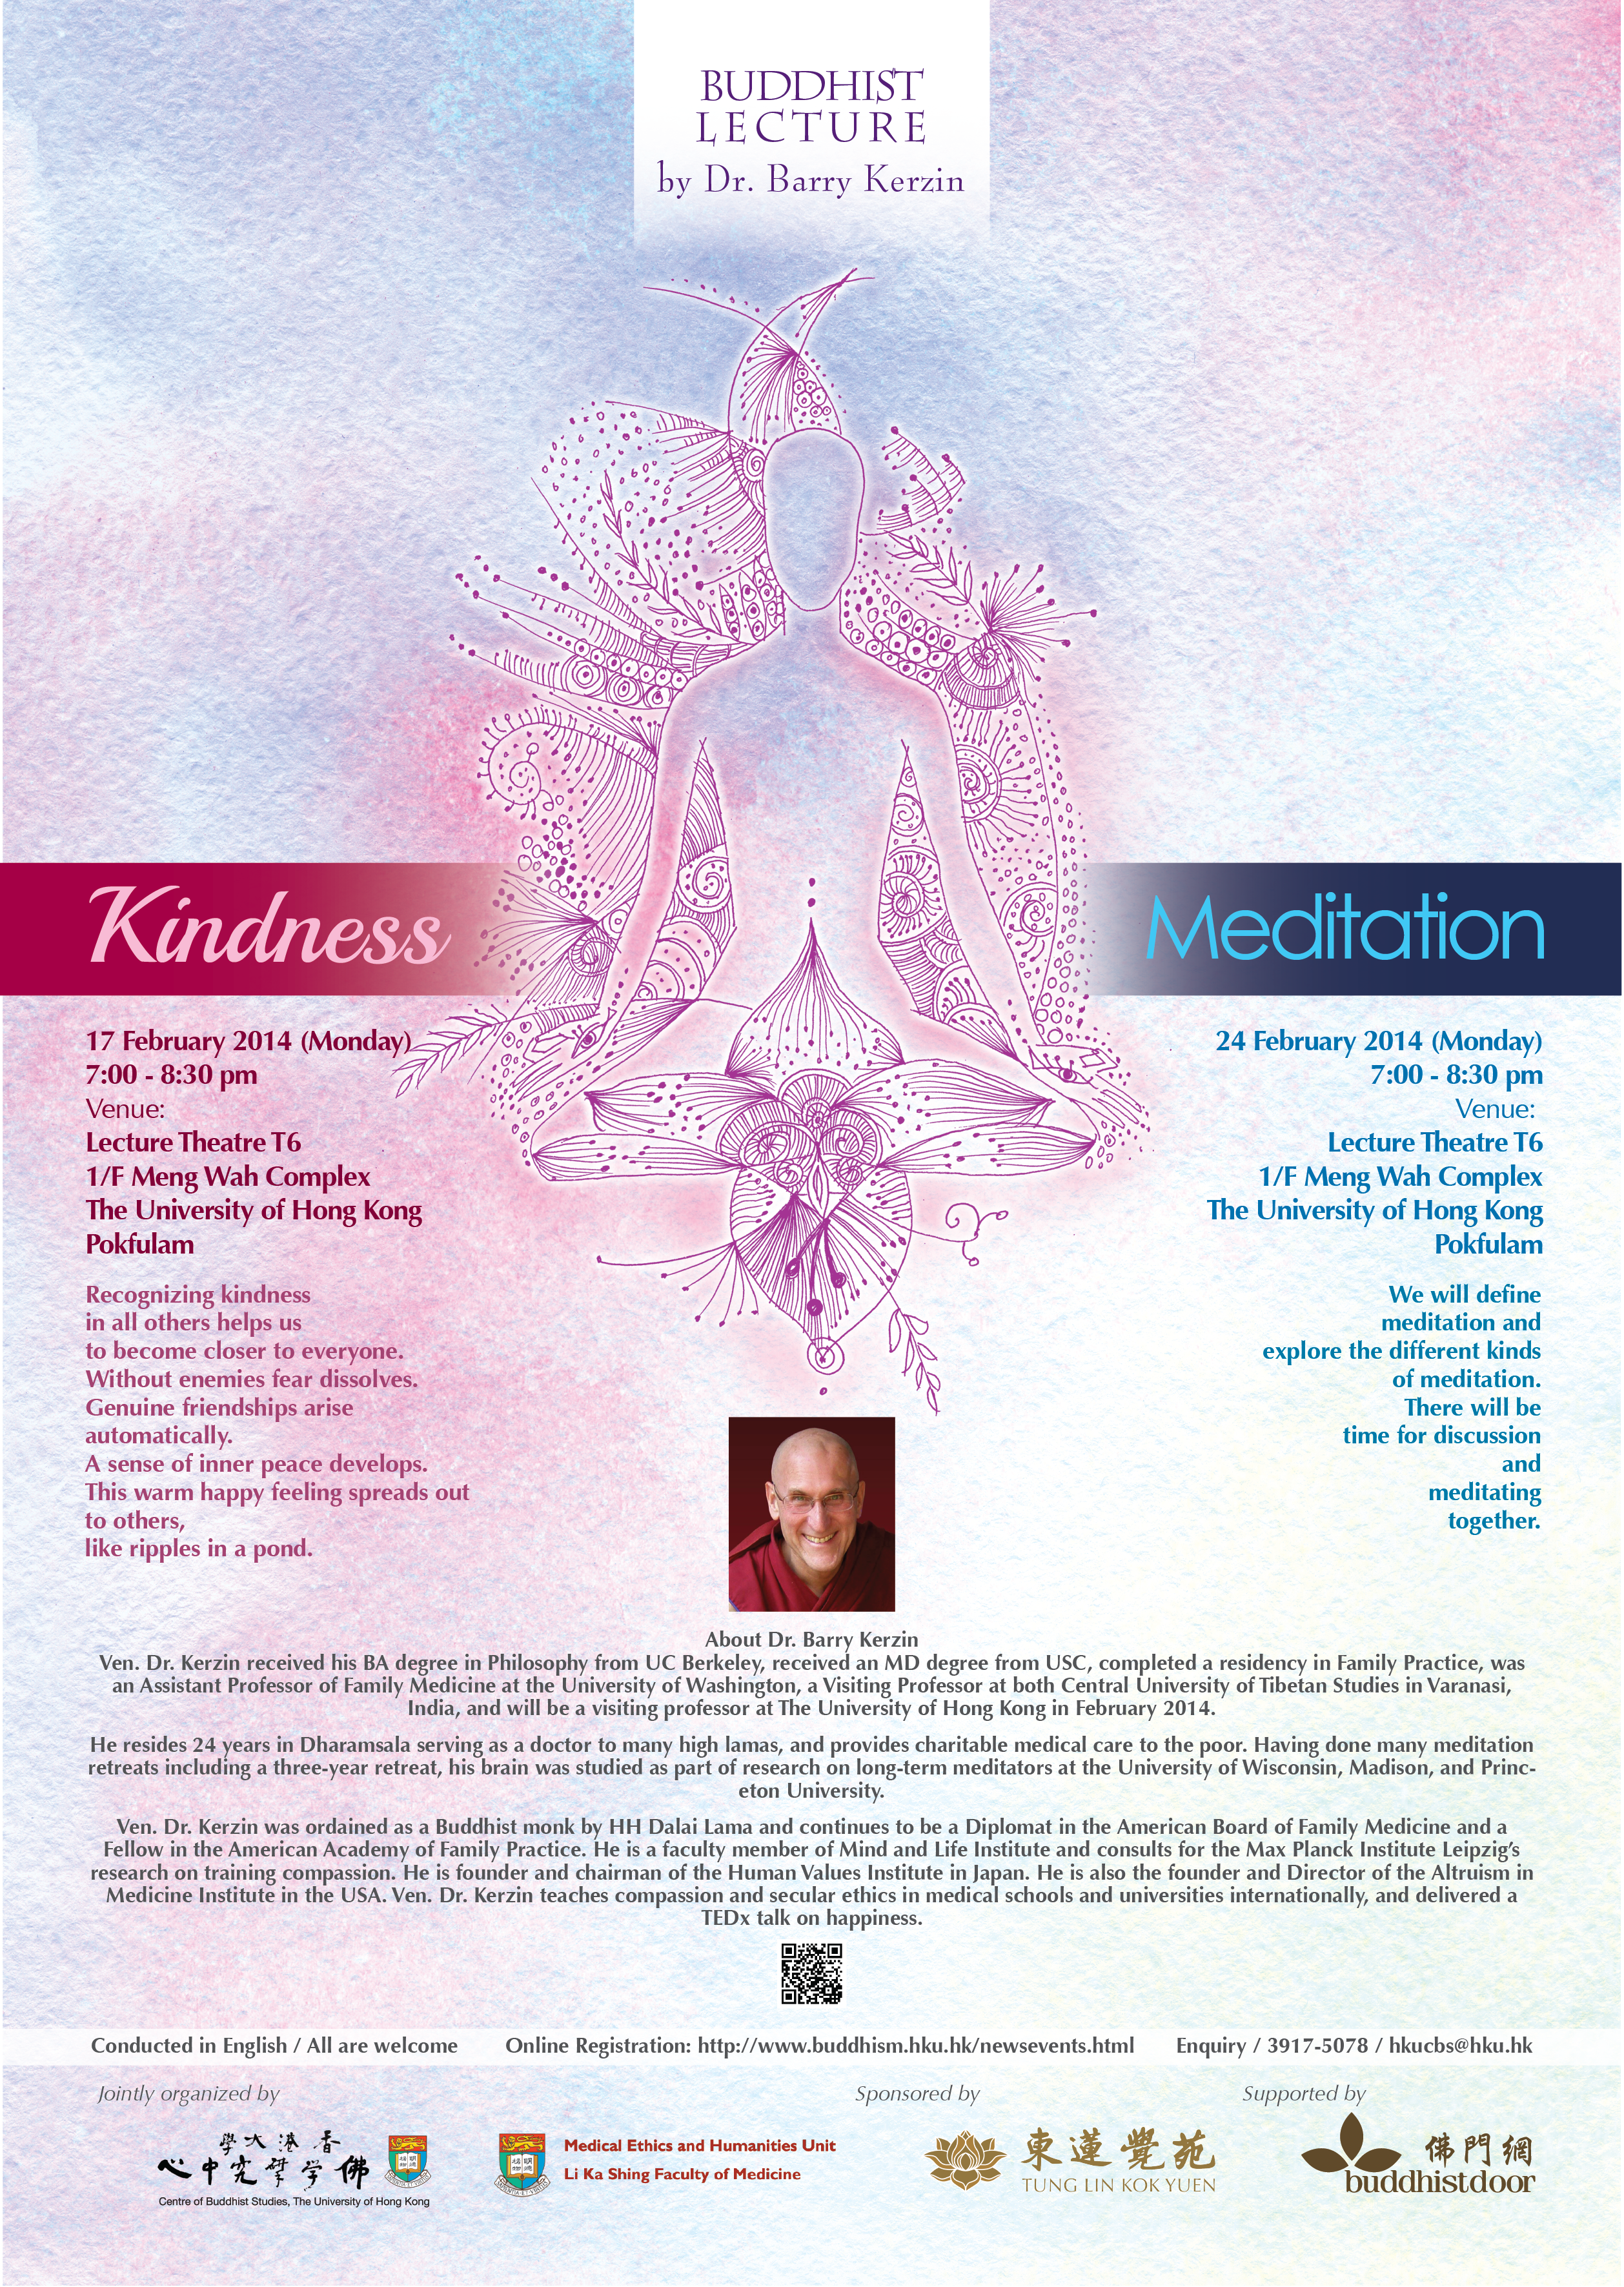 Buddhist Lecture by Dr. Barry Kerzin - Lecture 1: Kindness - Lecture 2: Meditation